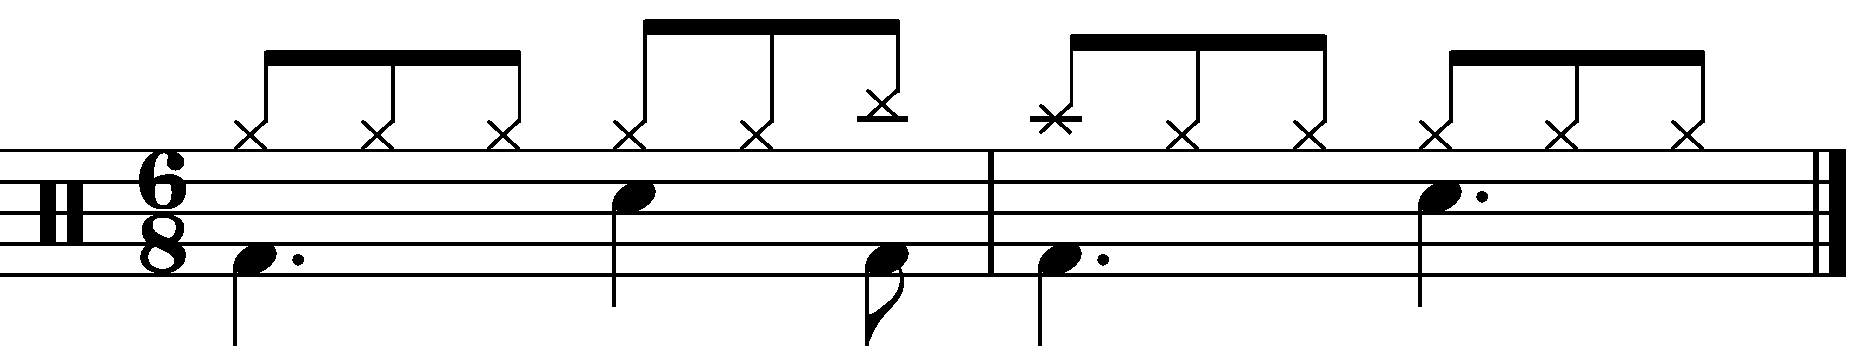 The concept applied to a 6/8 groove